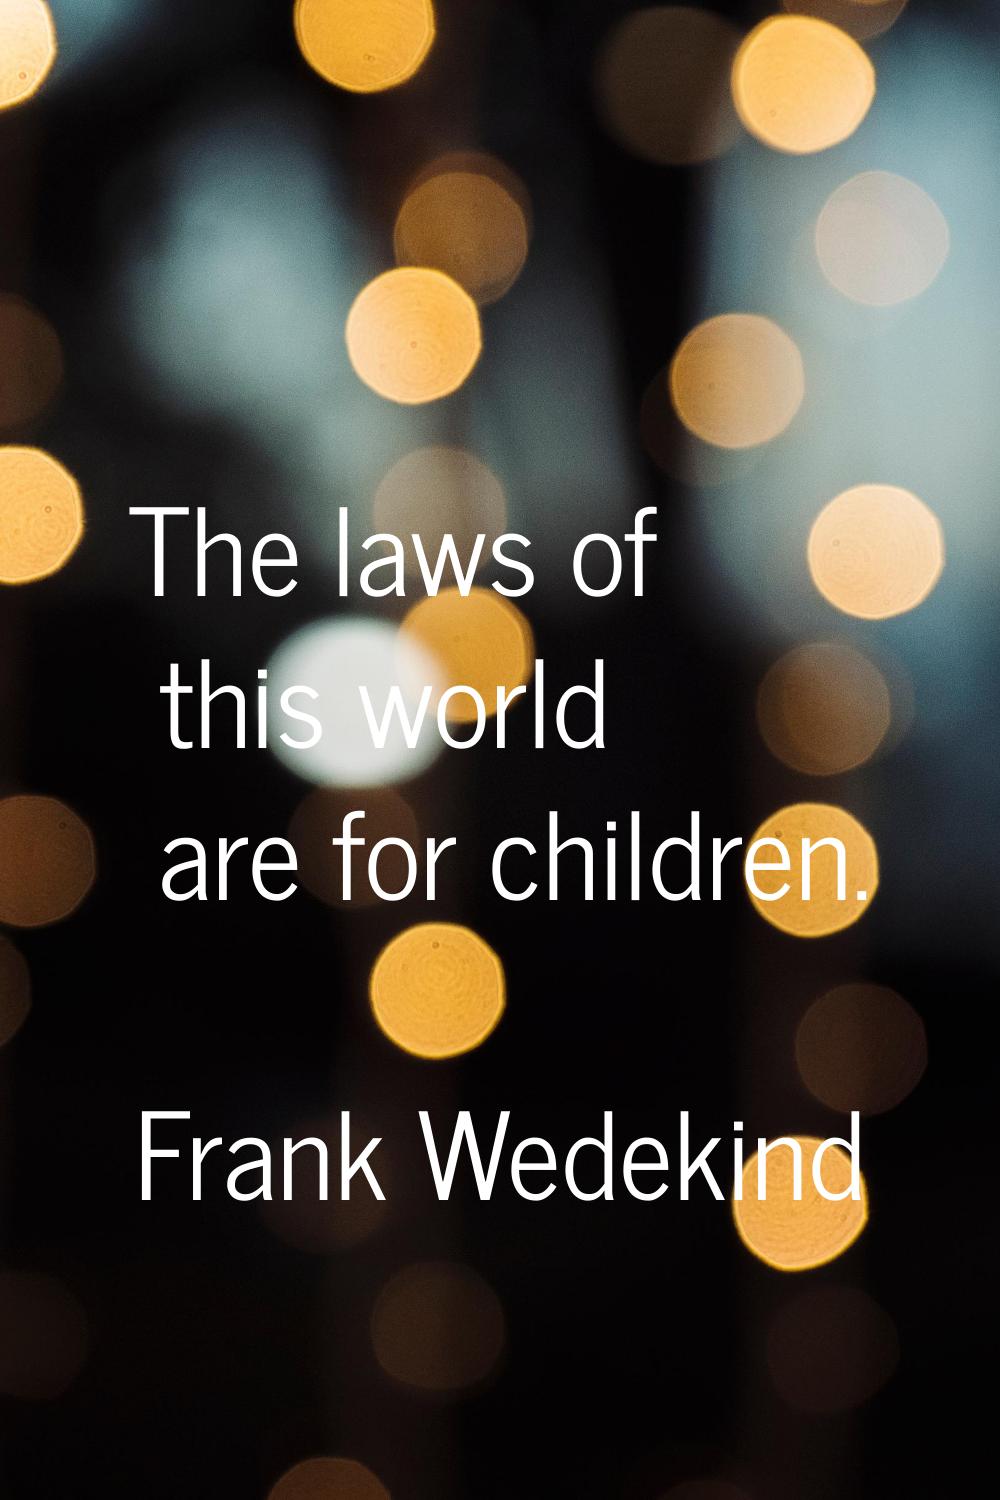 The laws of this world are for children.